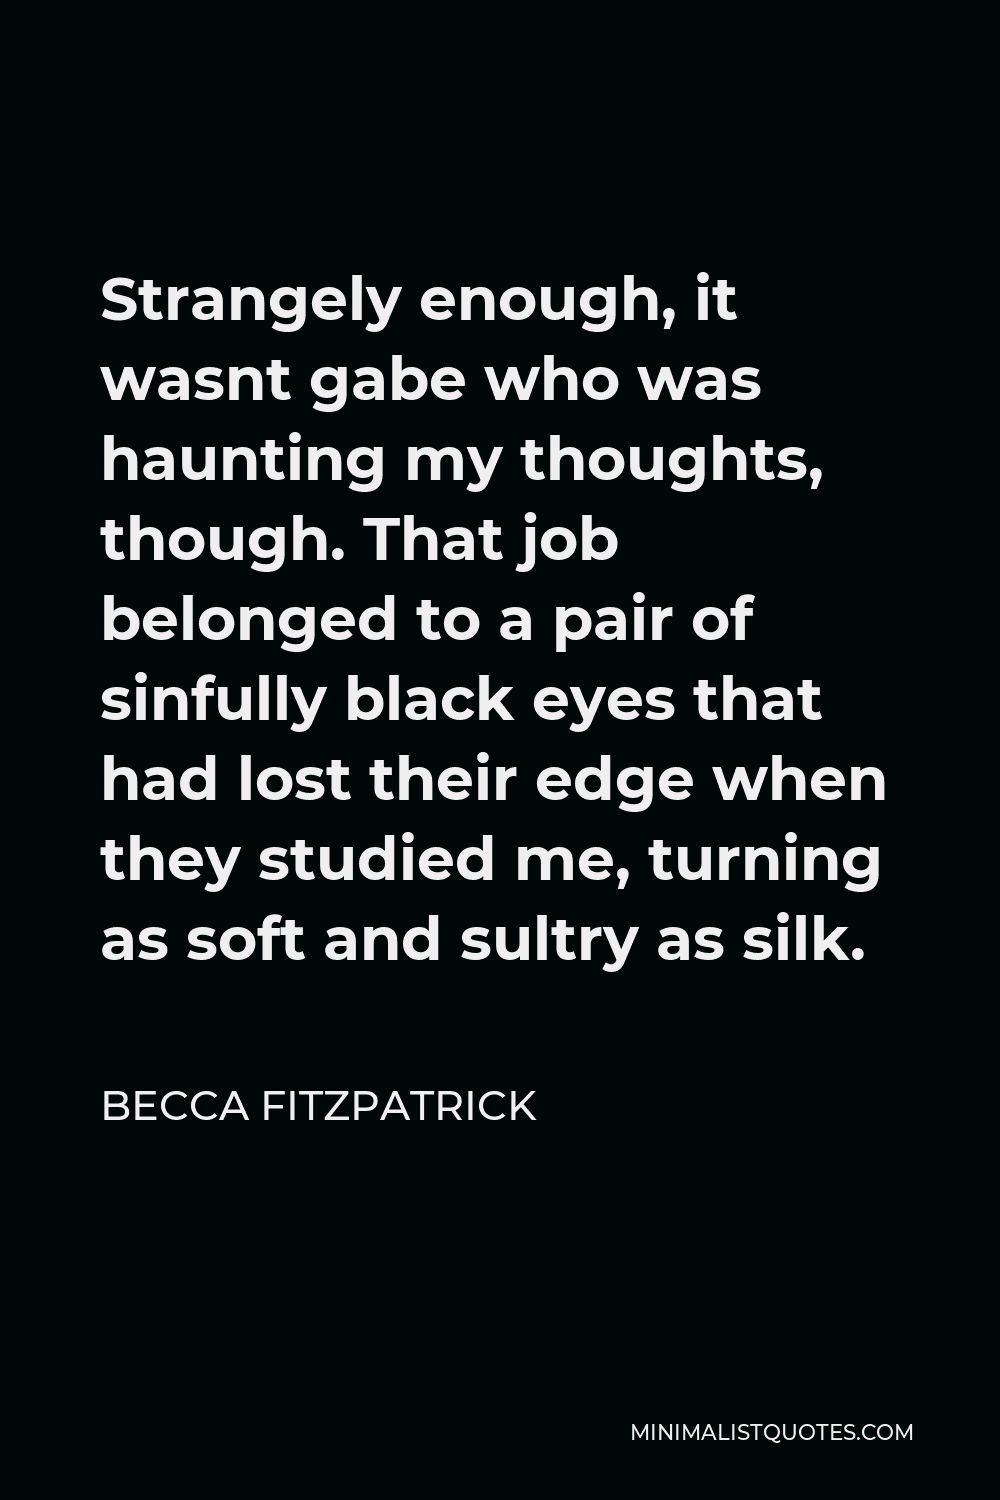 Becca Fitzpatrick Quote - Strangely enough, it wasnt gabe who was haunting my thoughts, though. That job belonged to a pair of sinfully black eyes that had lost their edge when they studied me, turning as soft and sultry as silk.